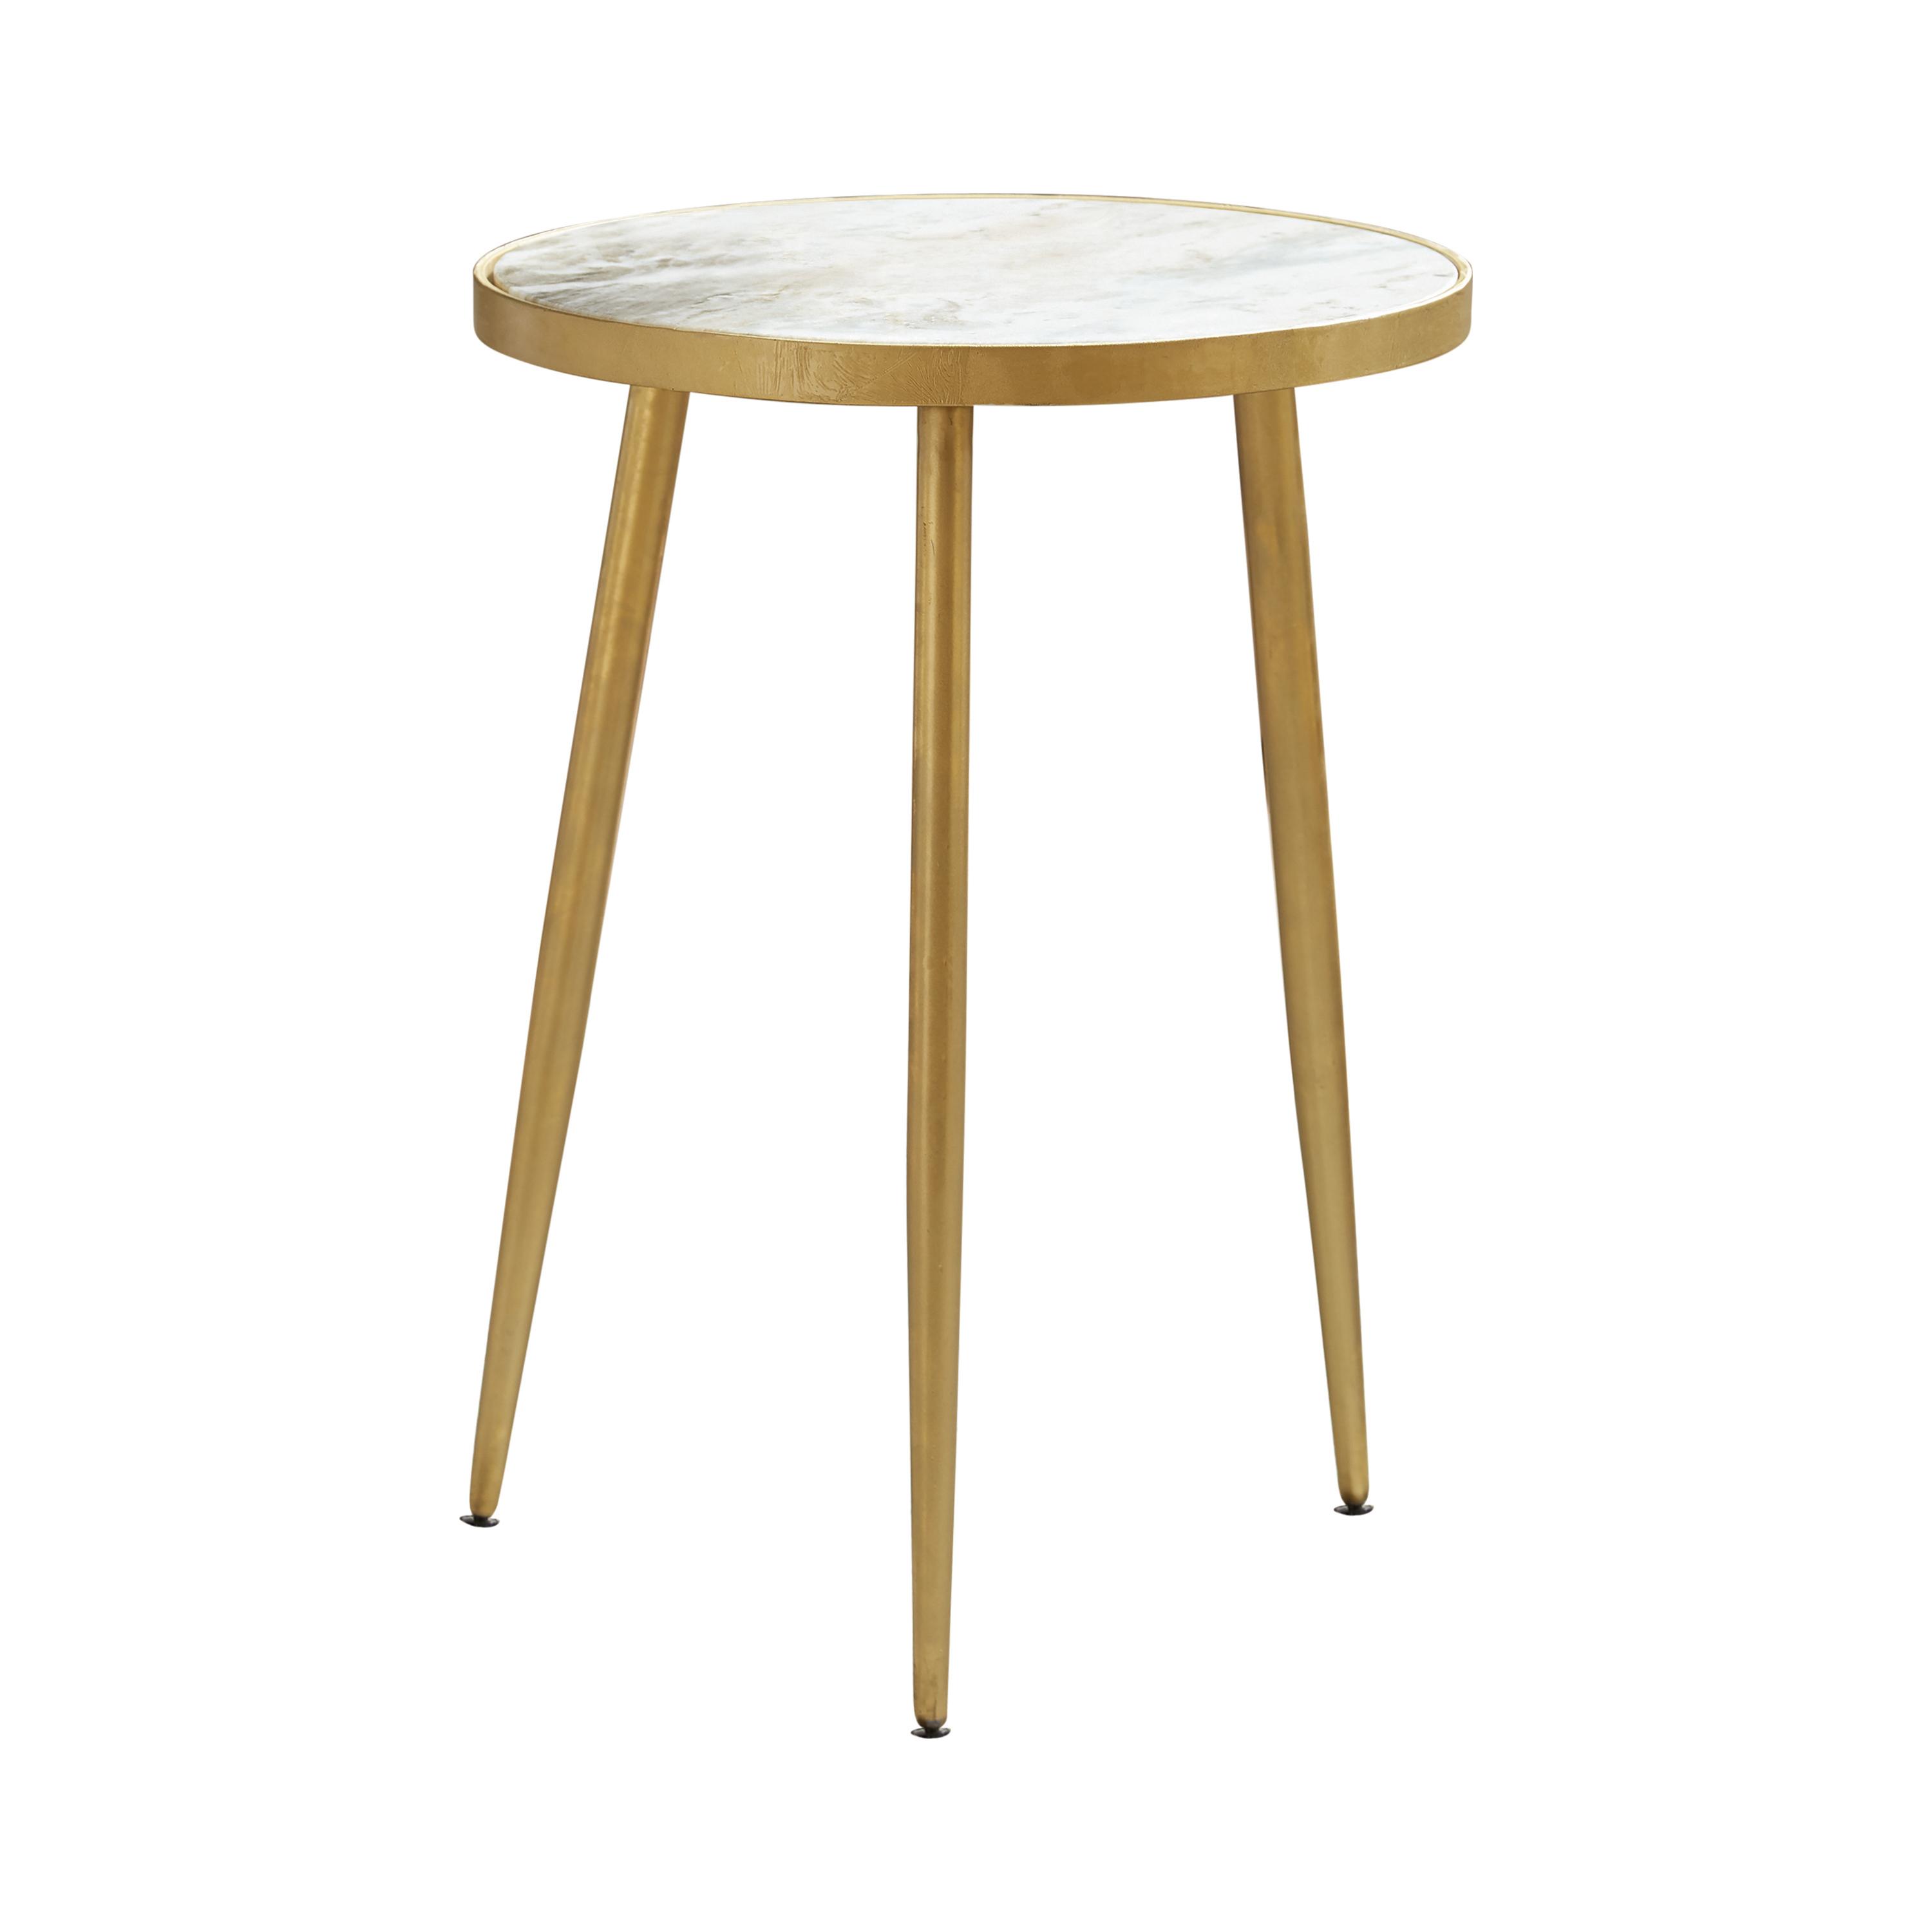 Modern Accent Table 930060 930060 in White 